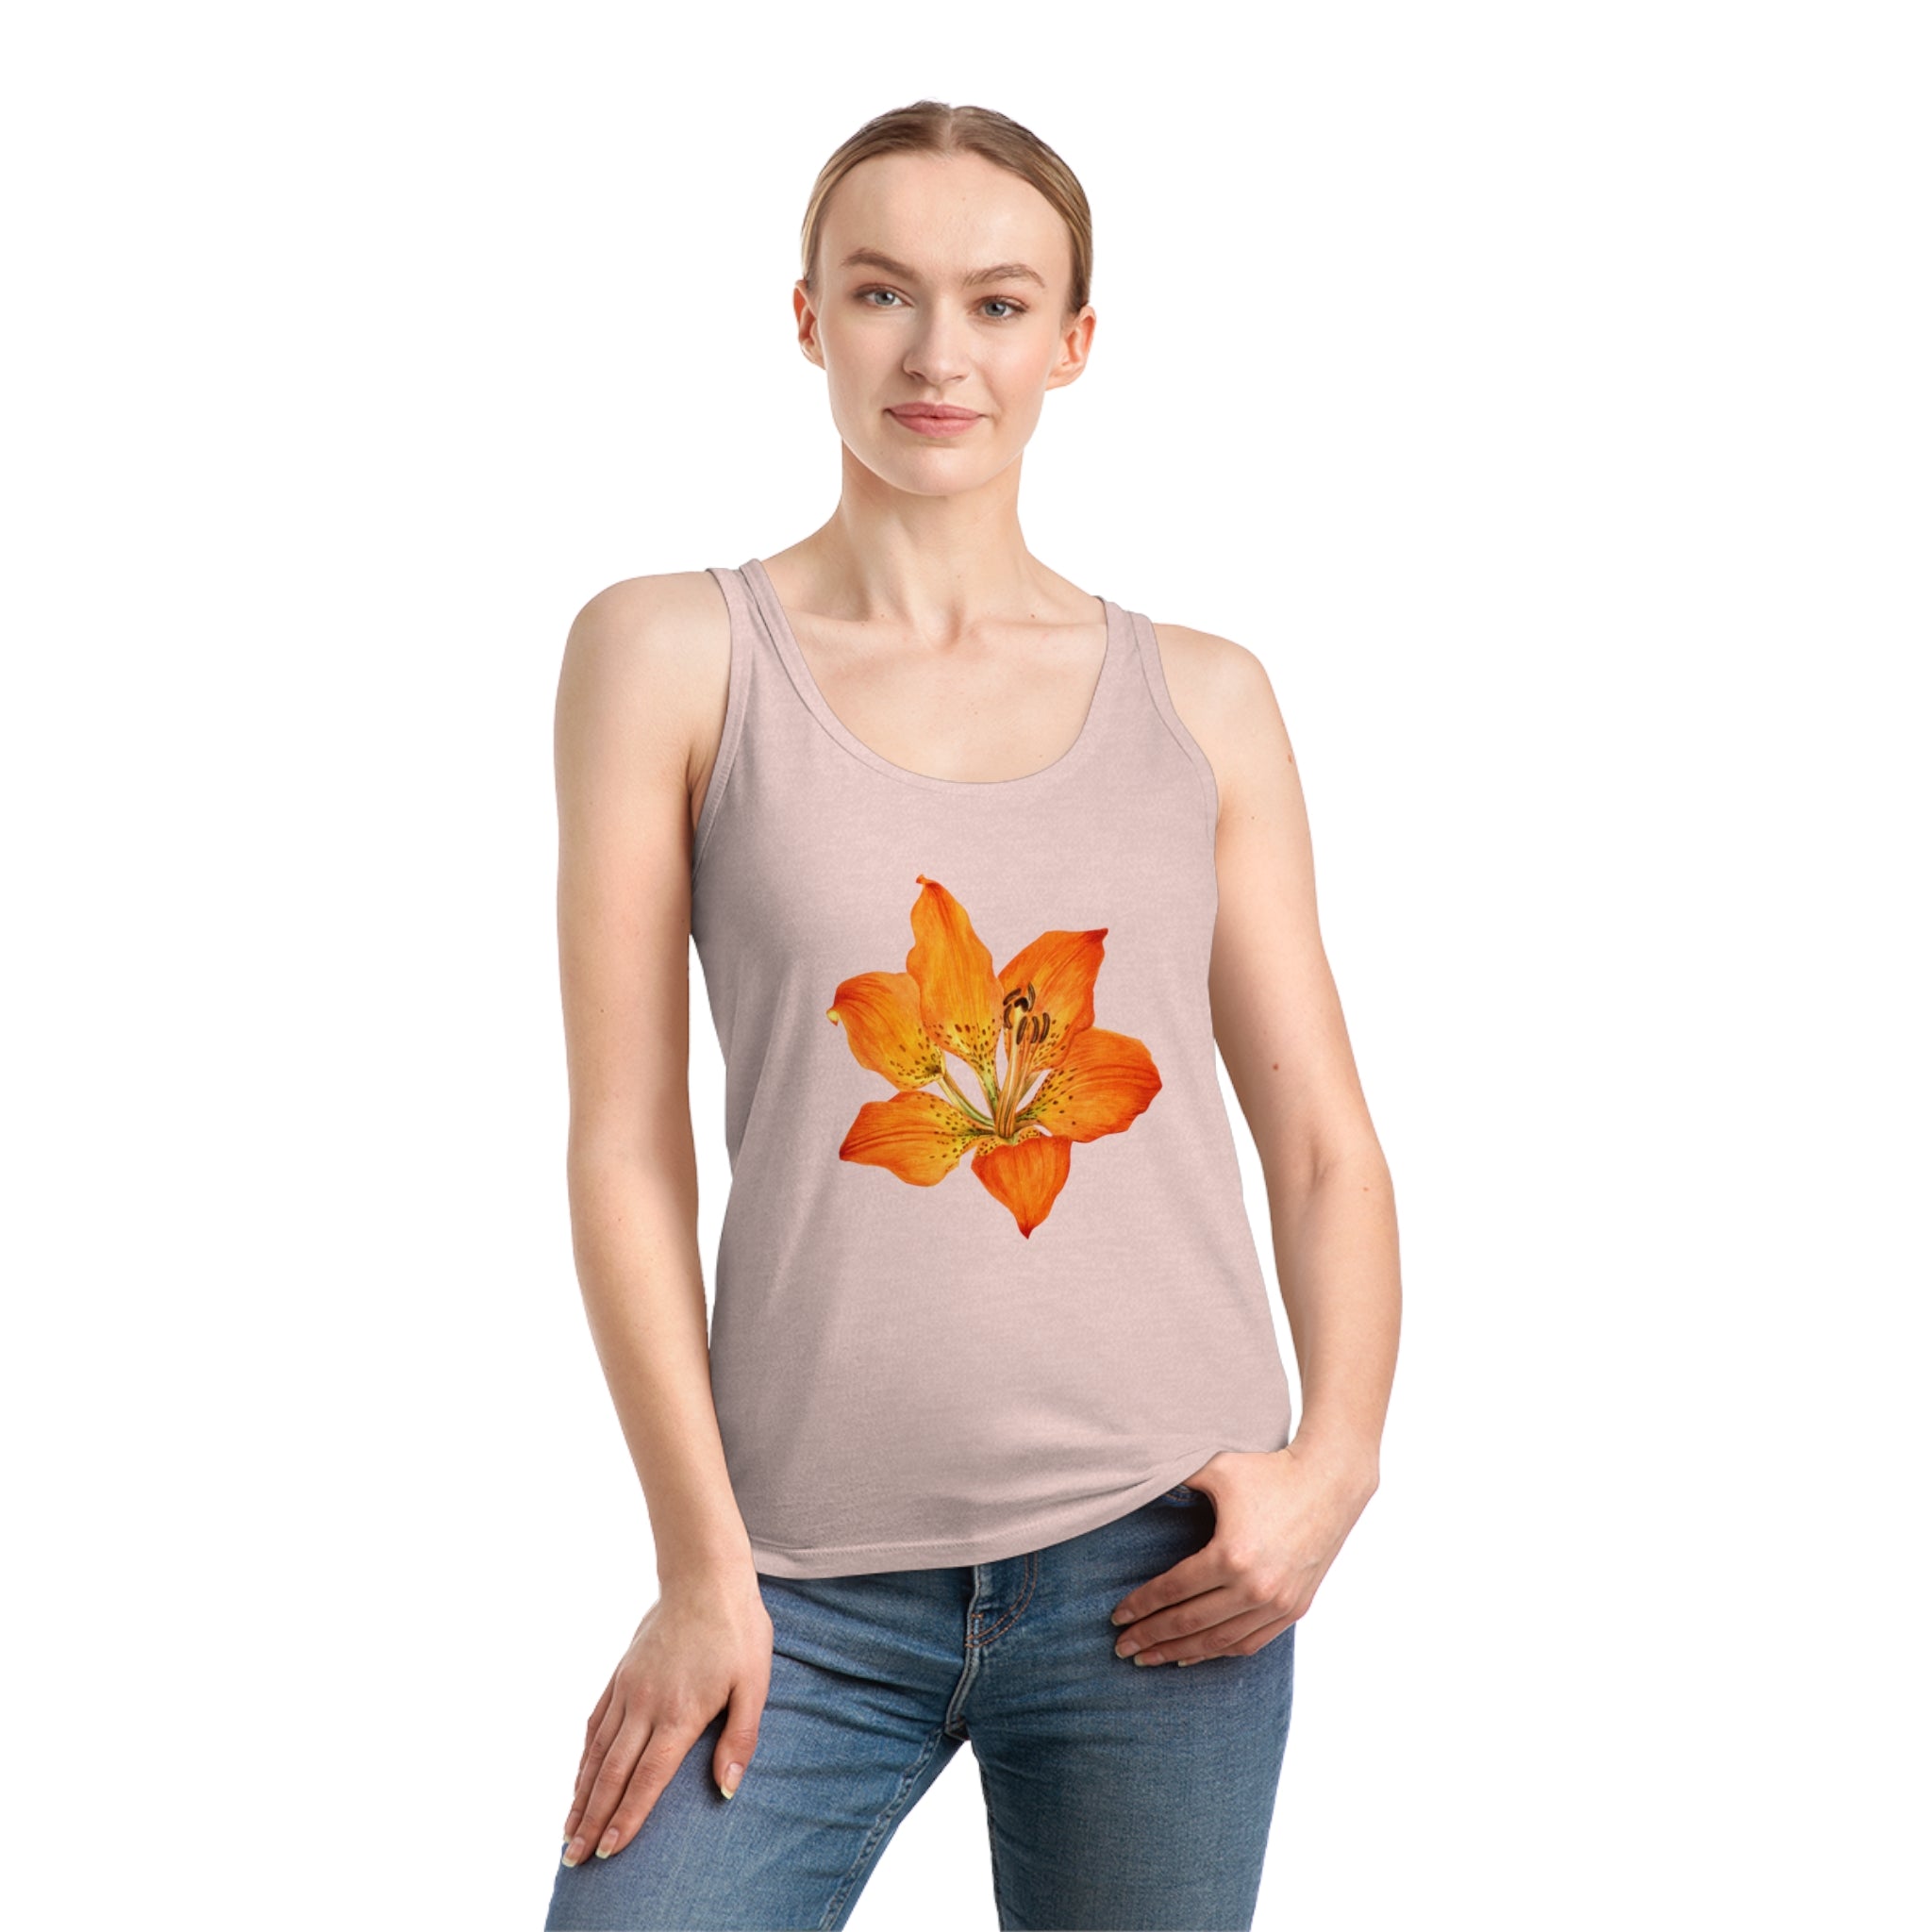 The Flower Boom Tank Top features a vibrant orange flower in a stunning floral print, crafted delicately with organic cotton.